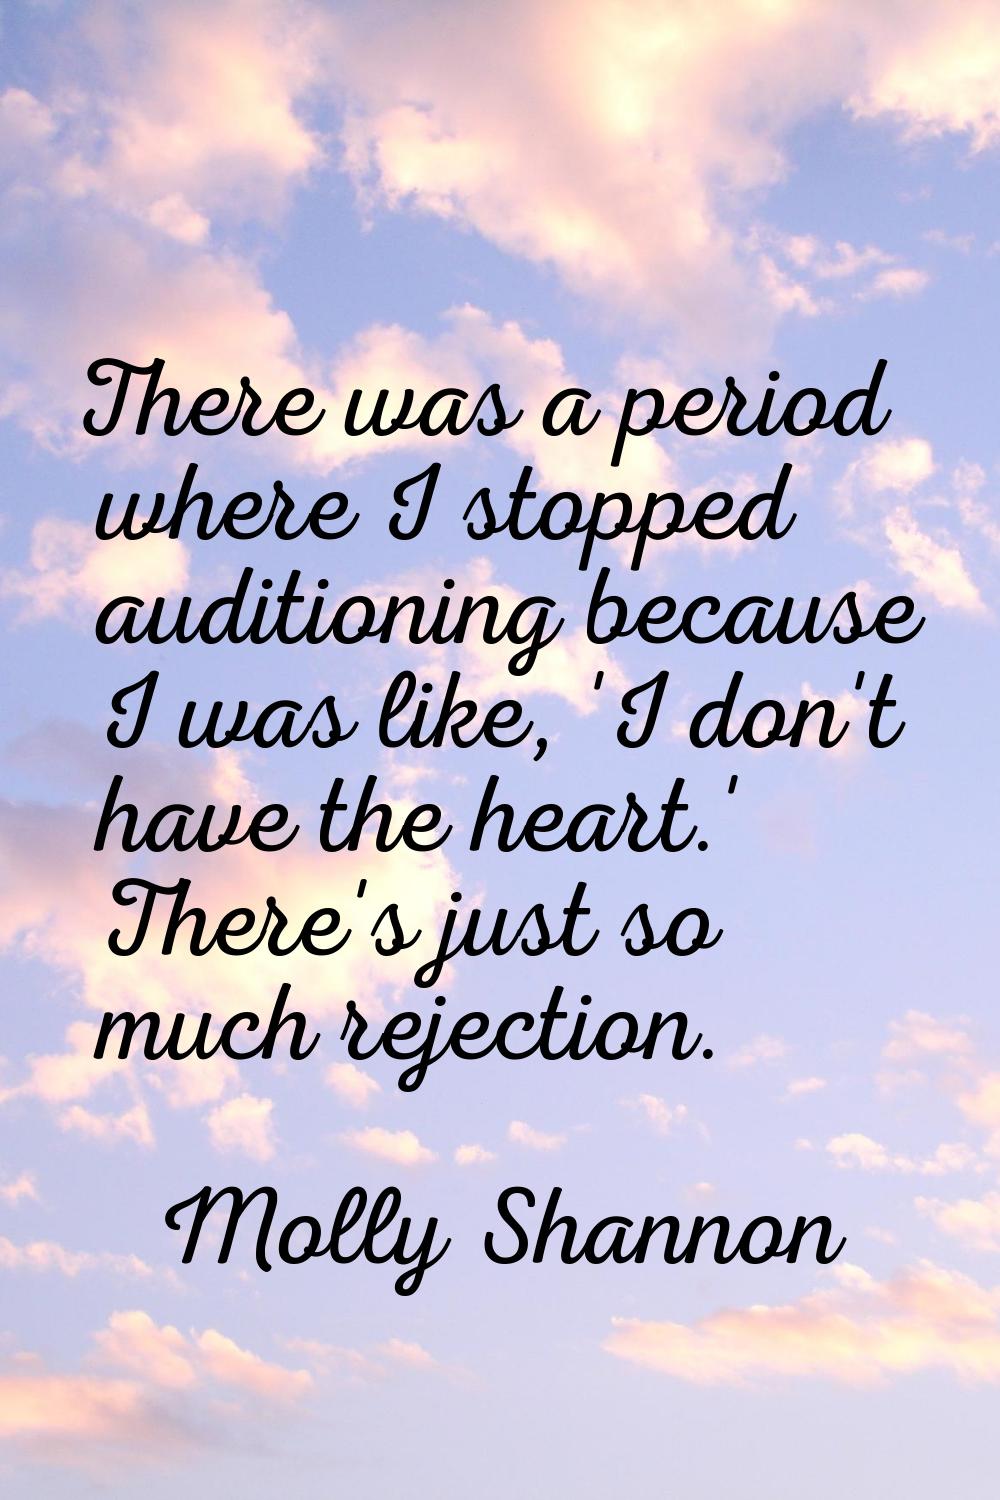 There was a period where I stopped auditioning because I was like, 'I don't have the heart.' There'